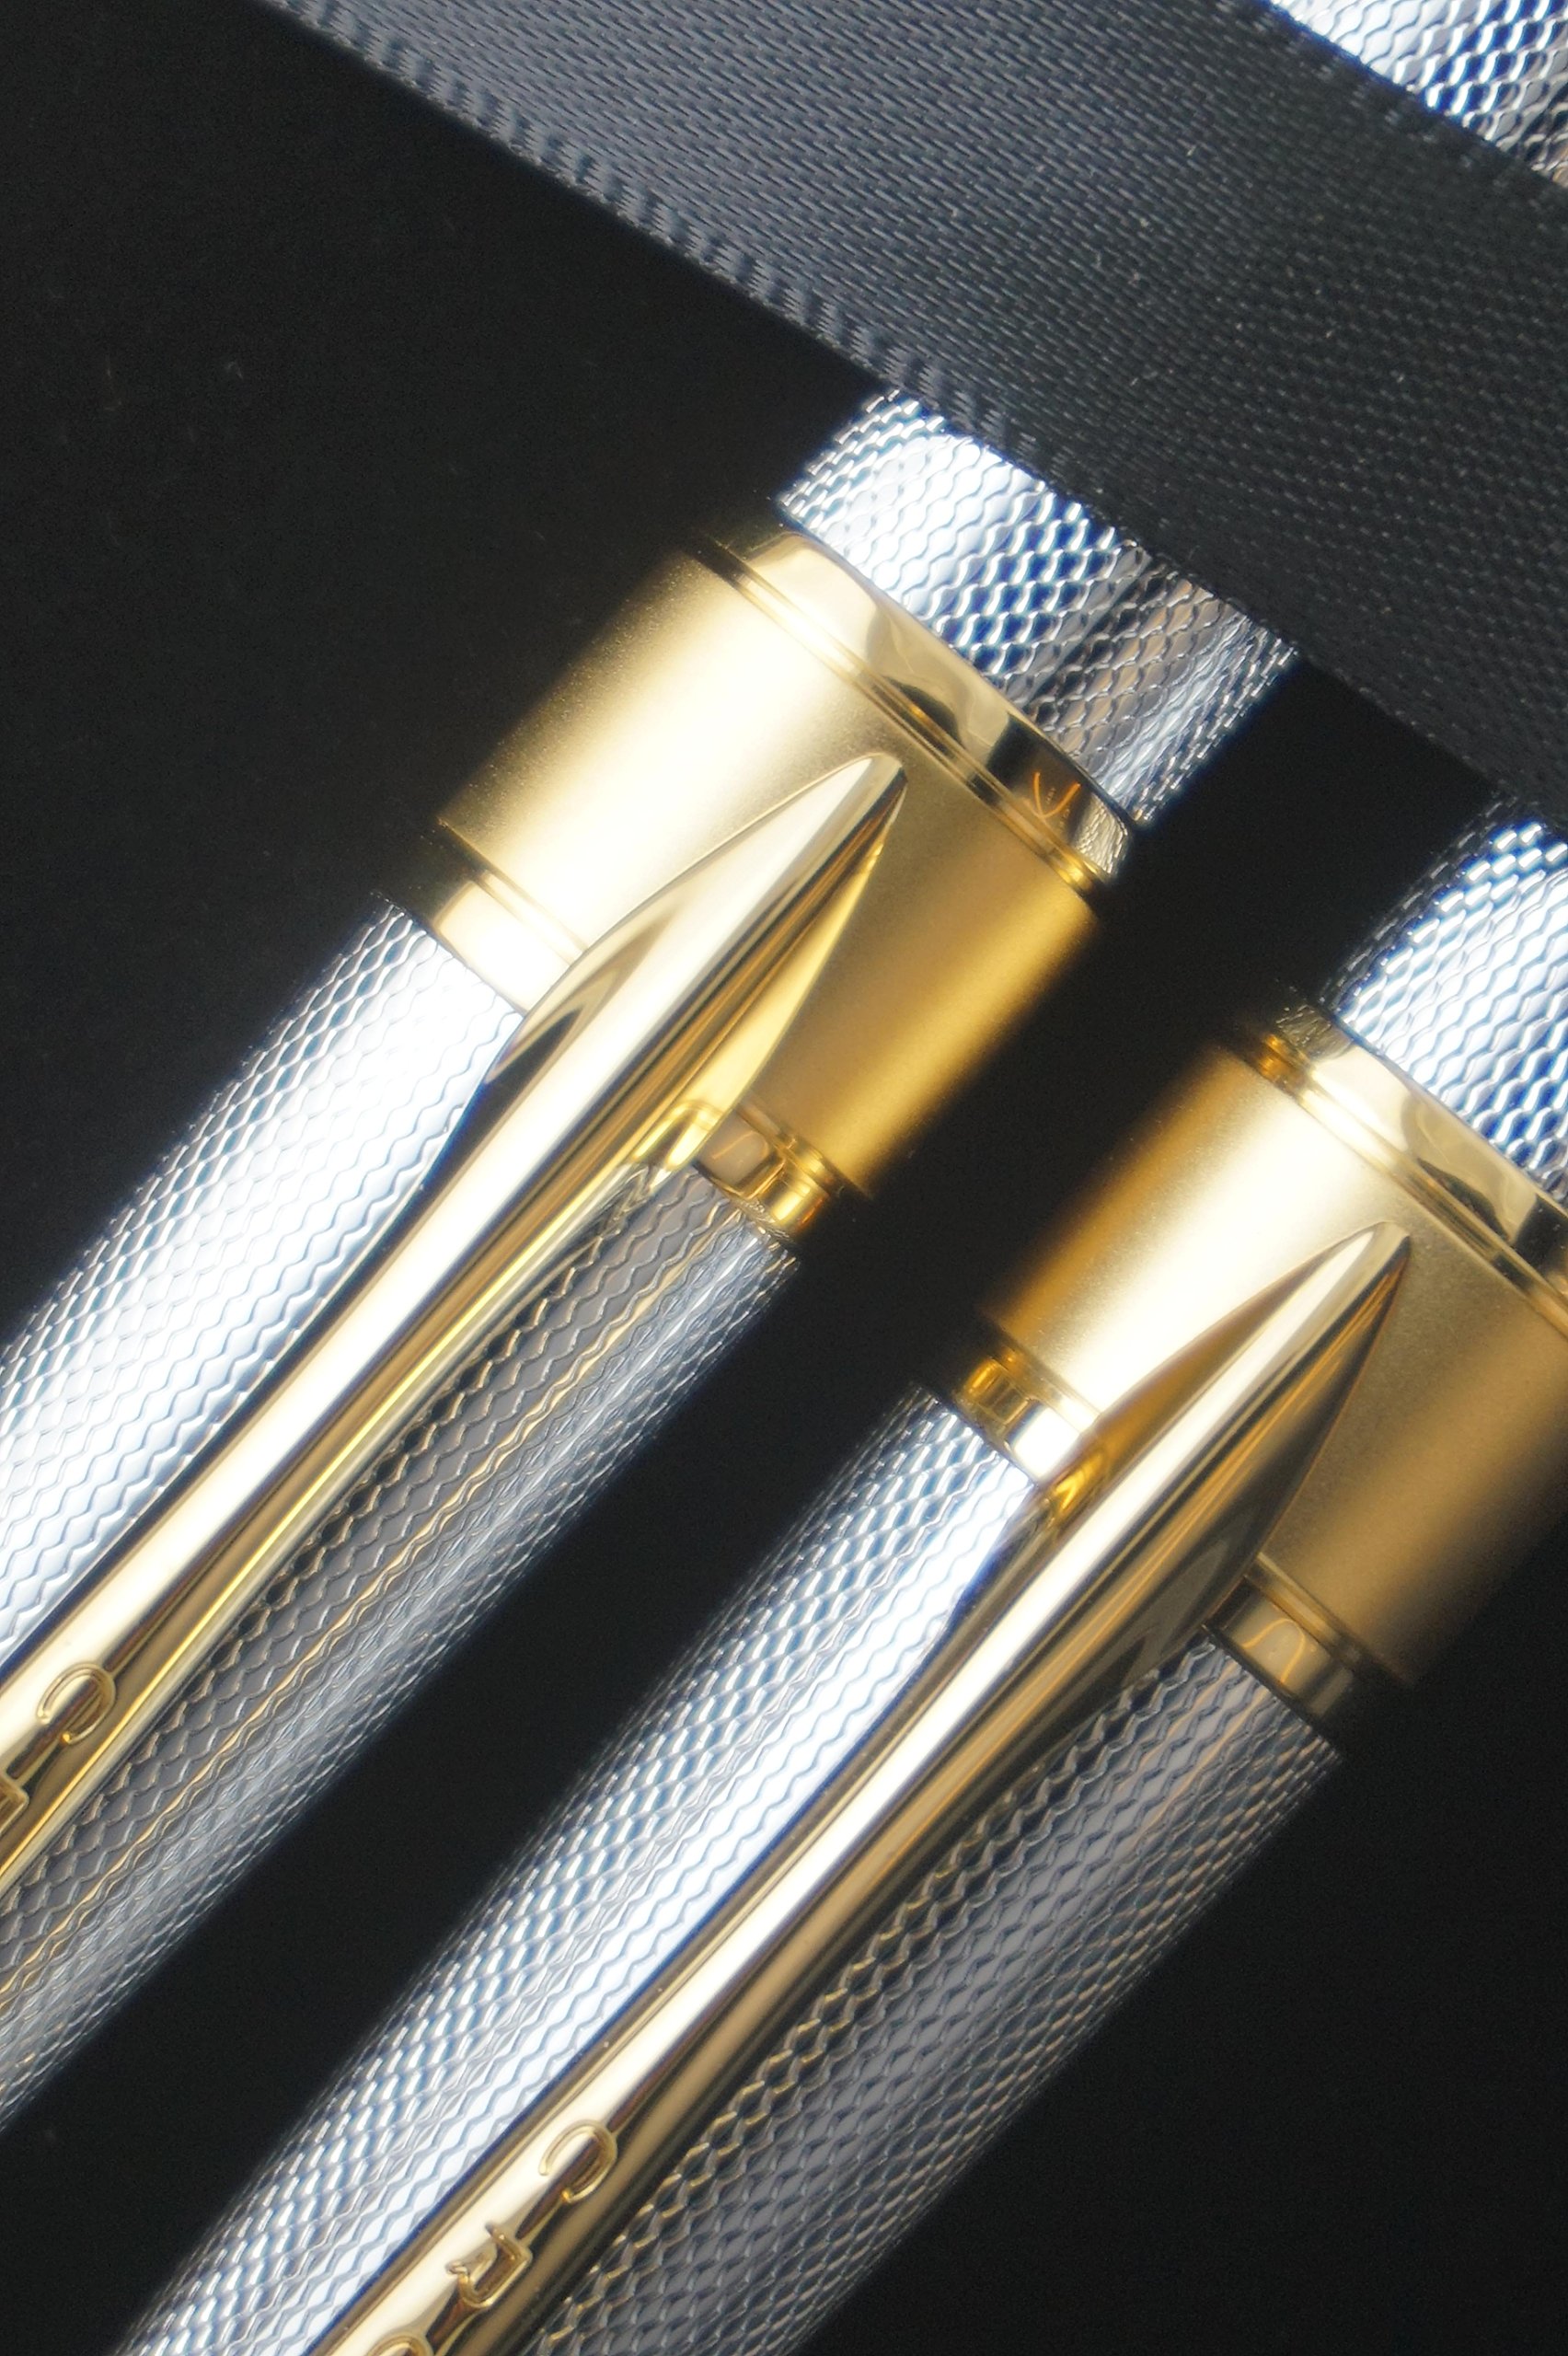 Cross Limited Edition in elegant haberdashery finishes Apogee Executive Diamond Cut Elegant 23KT Gold Medalist Selectip with Gel Ink Rollerball pen...